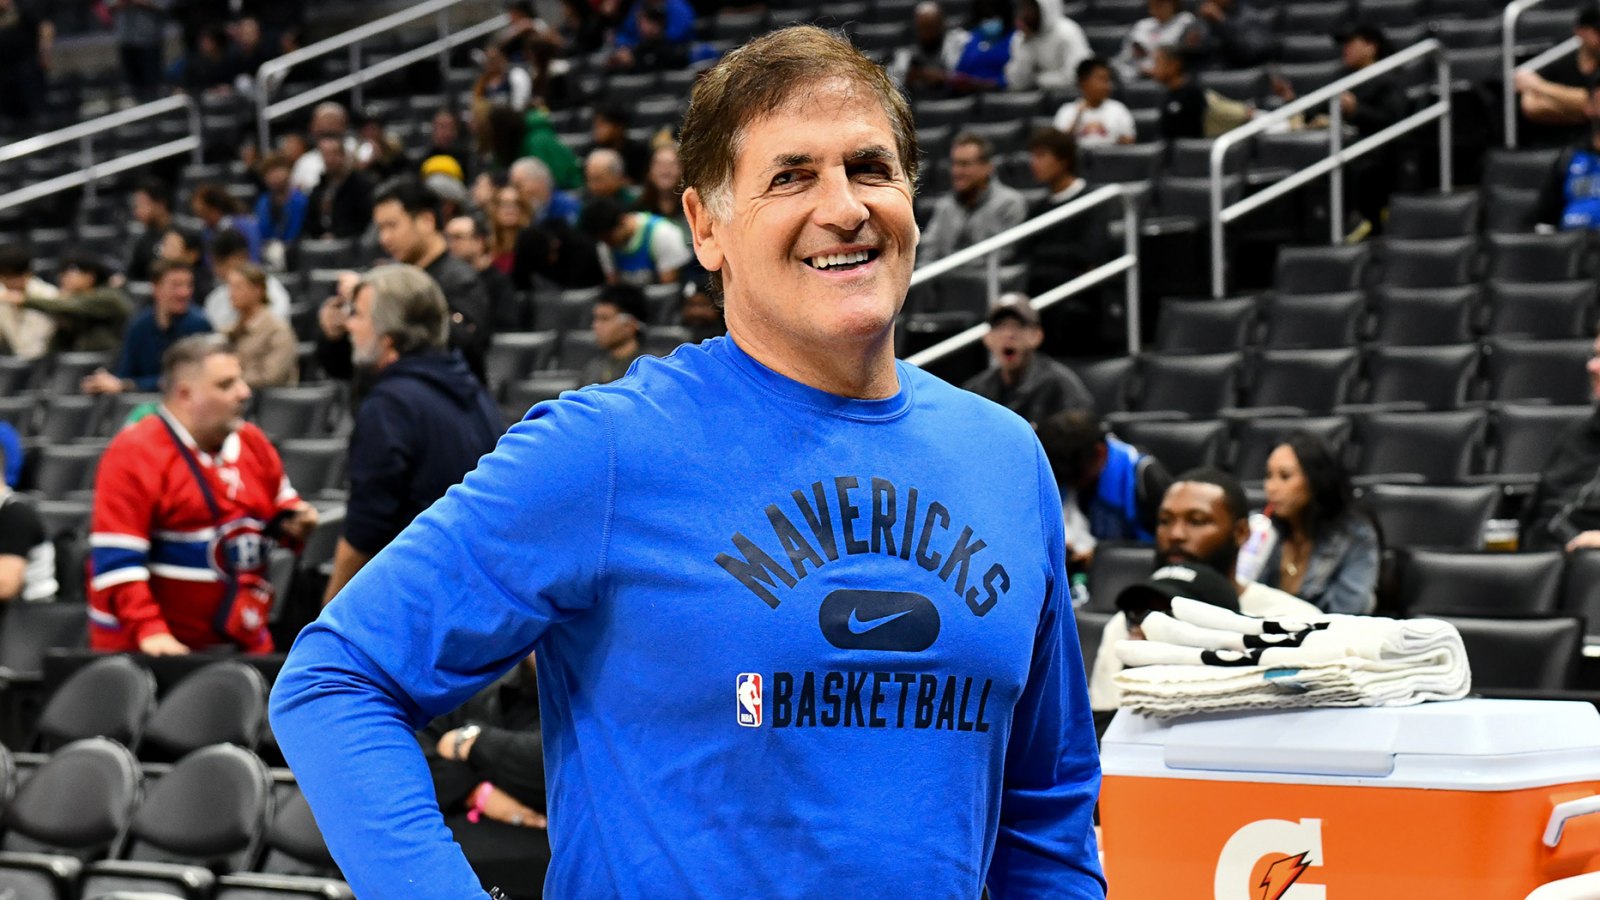 Mark Cuban Reportedly Selling Majority Stake in Dallas Mavericks After Announcing ‘Shark Tank’ Exit